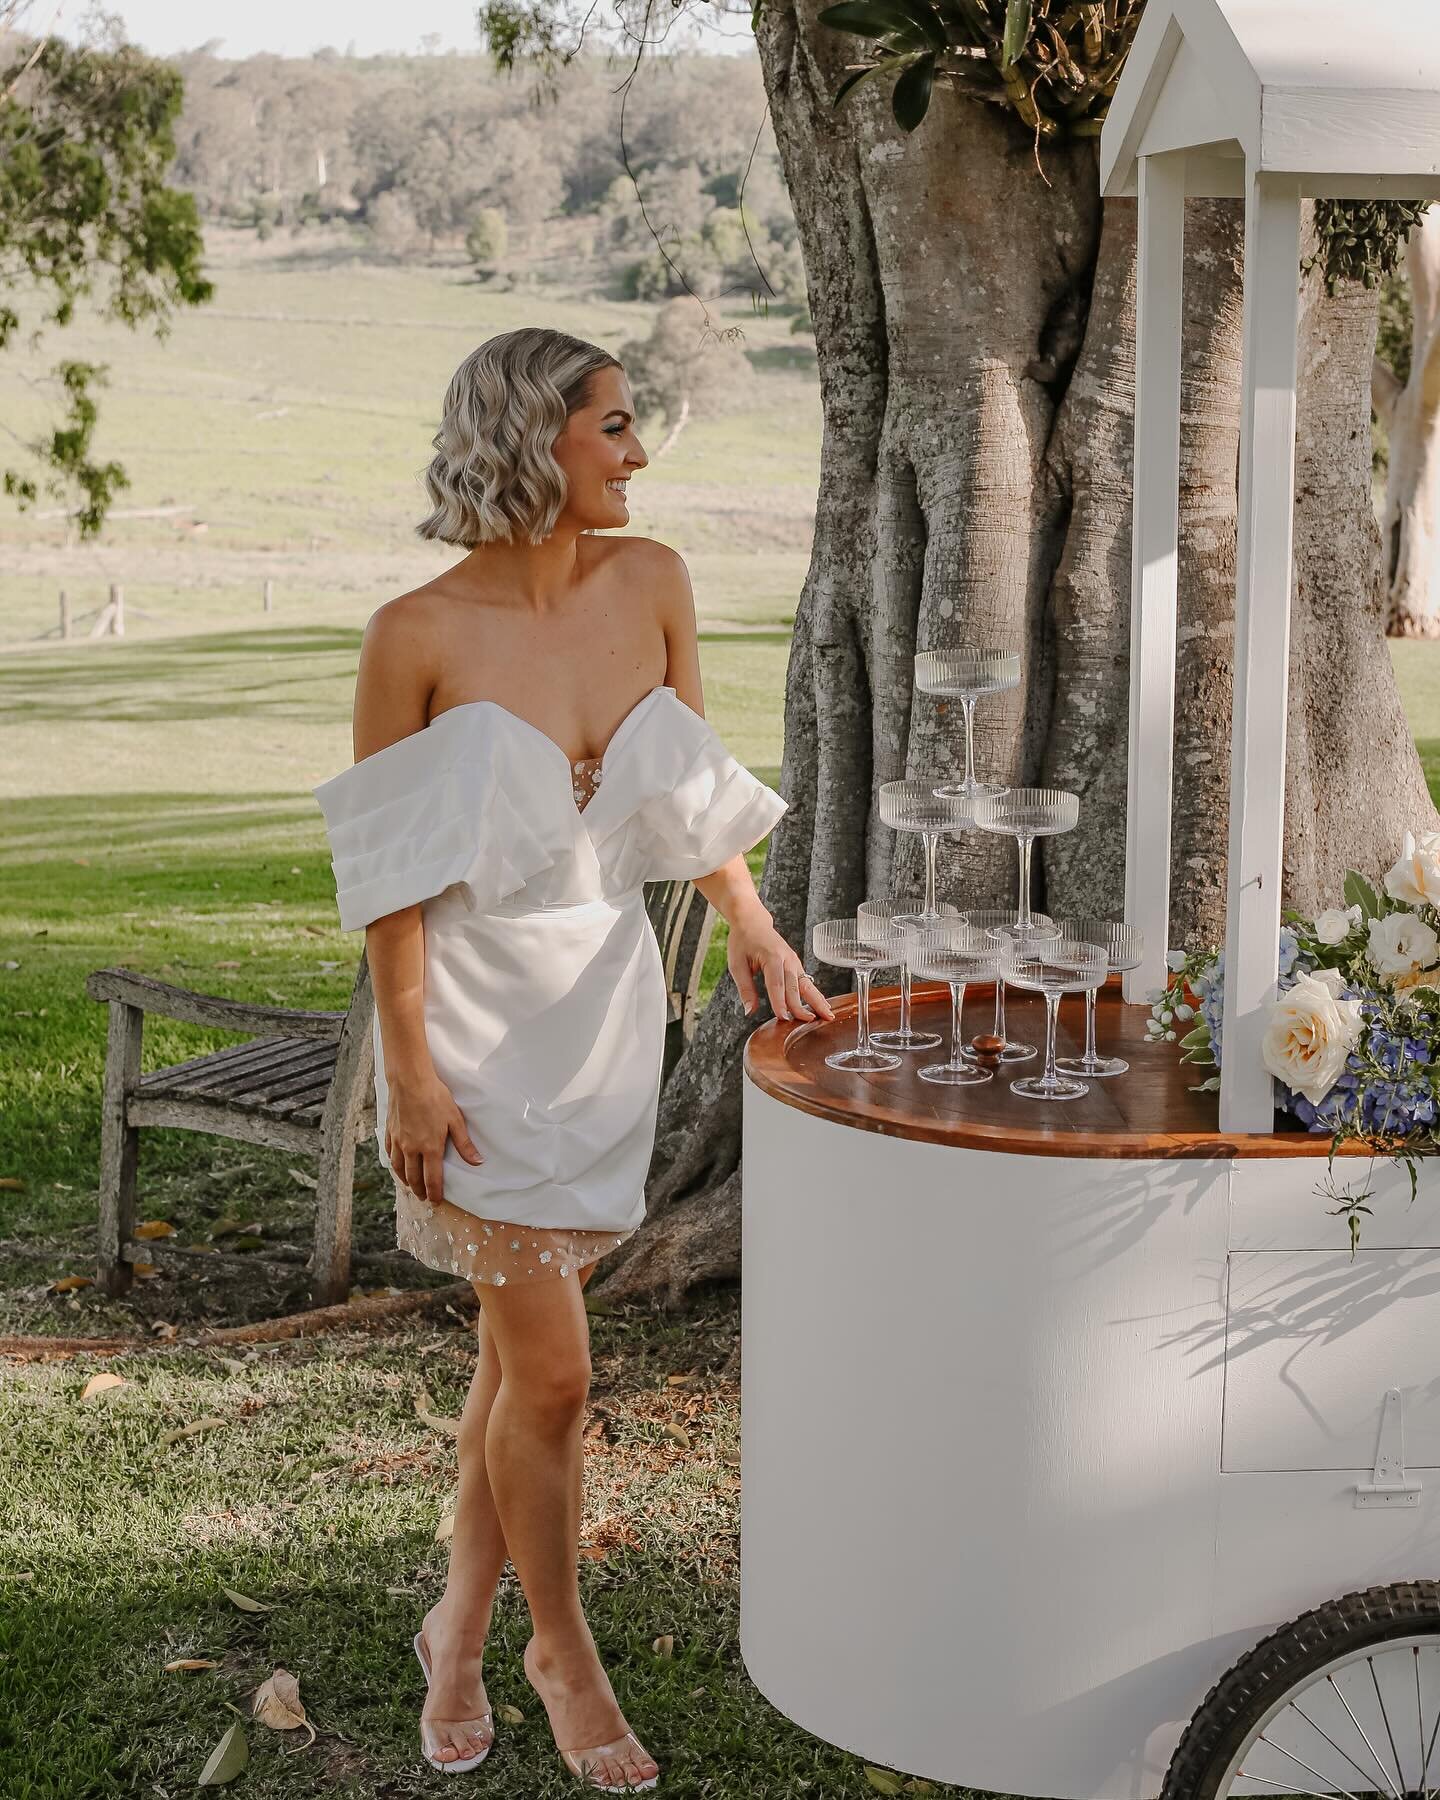 A moment for this stunning bride and my favourite bar cart 😍

Did you know our gorgeous bar cart is available to hire for your event? Bar staff also available on request.

Team:
Photography - @katyfiona_photography 
Venue - @bunnyconnellen 
Dress, v